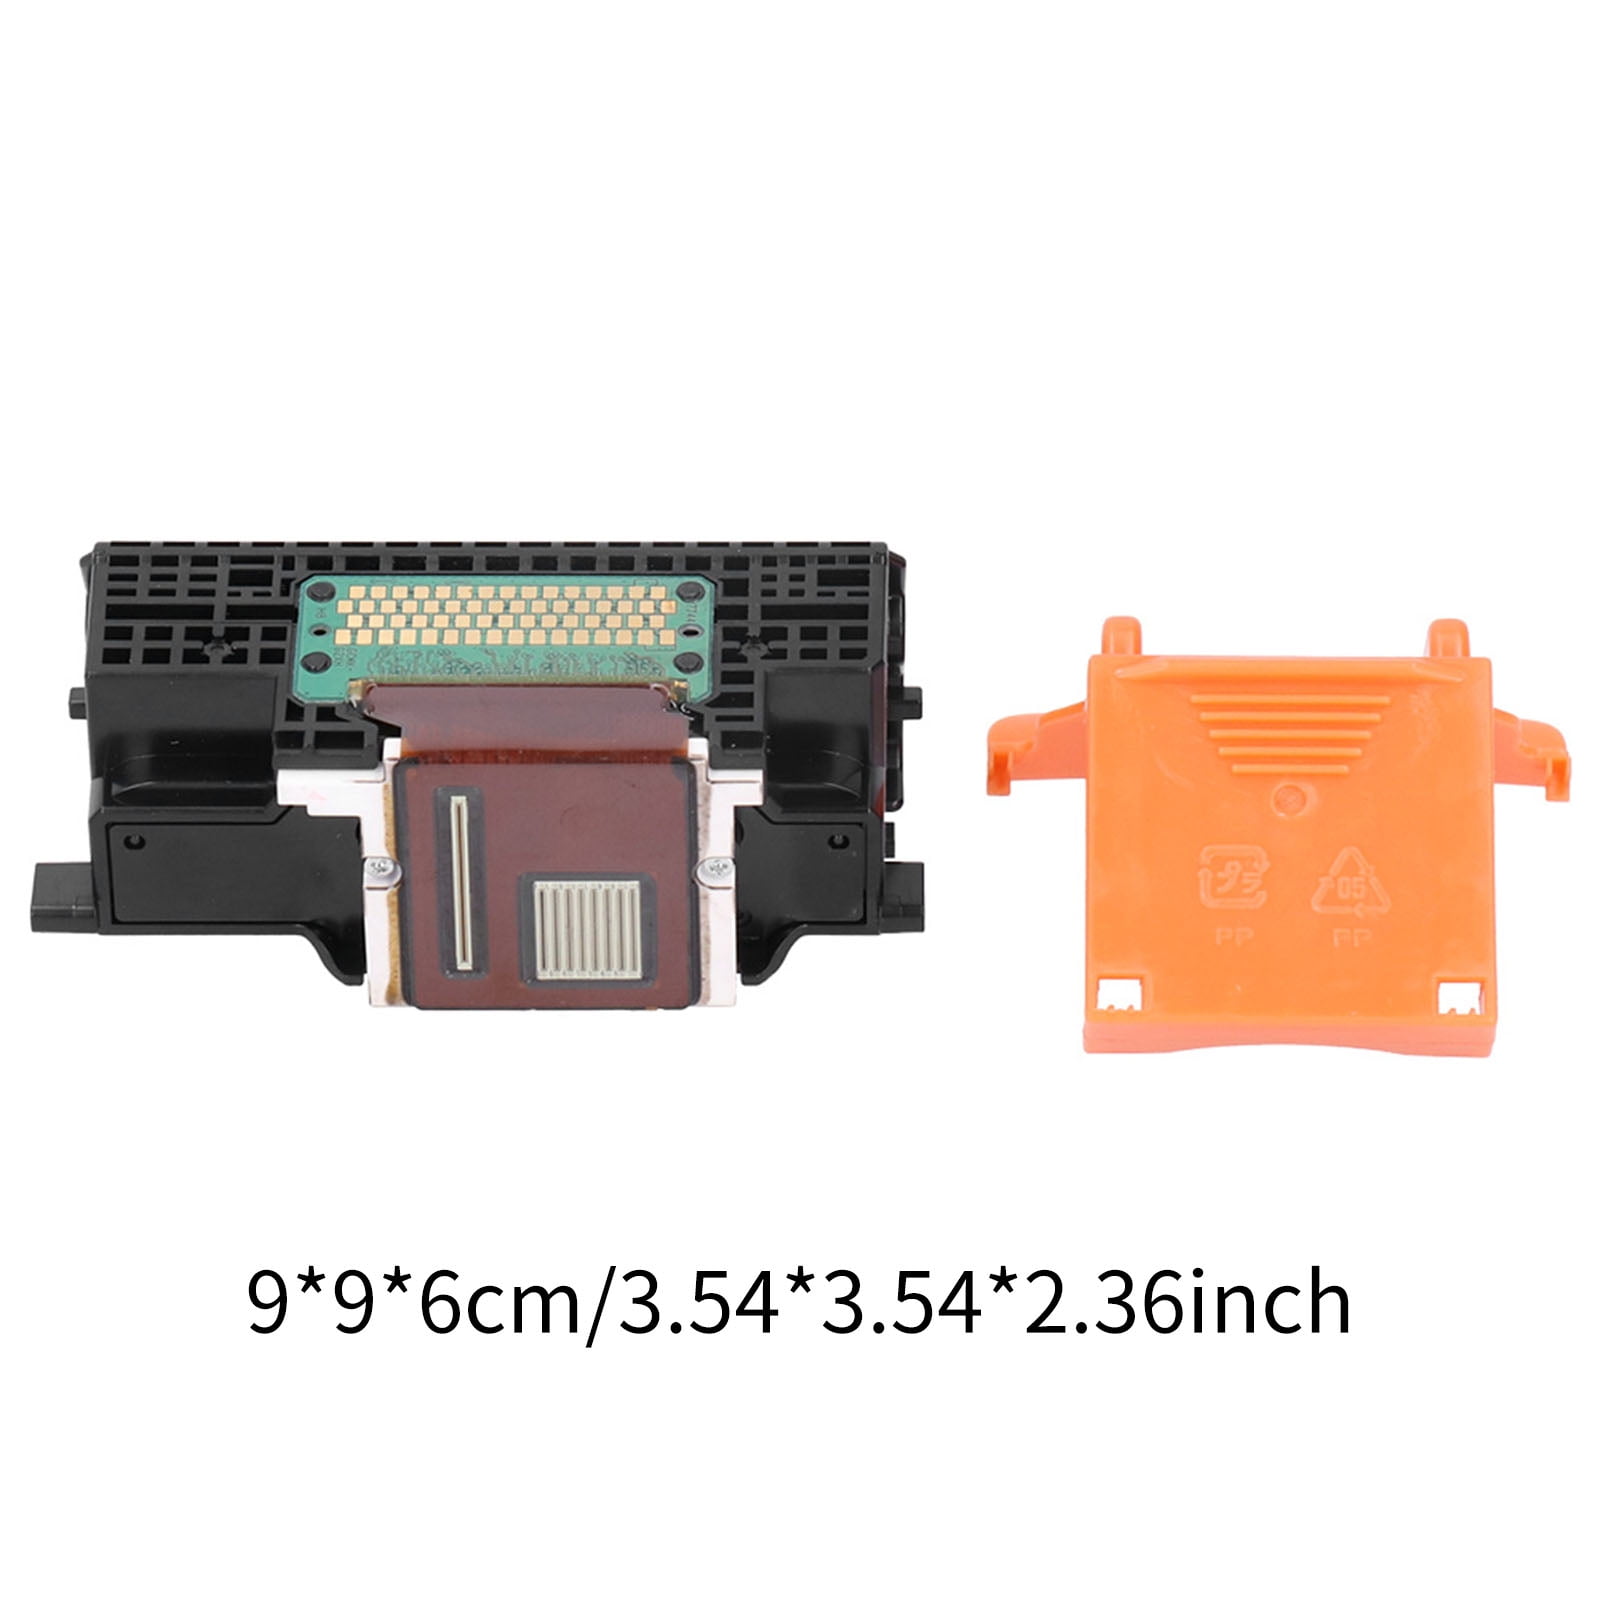 QY6‑0078 Print Head Printhead Replacement for Canon MG6220 MG6140 MG6180 MG6100 MG6150 MG6200 MG6210 Printers PUSOKEI 1Pcs Color Print Head 